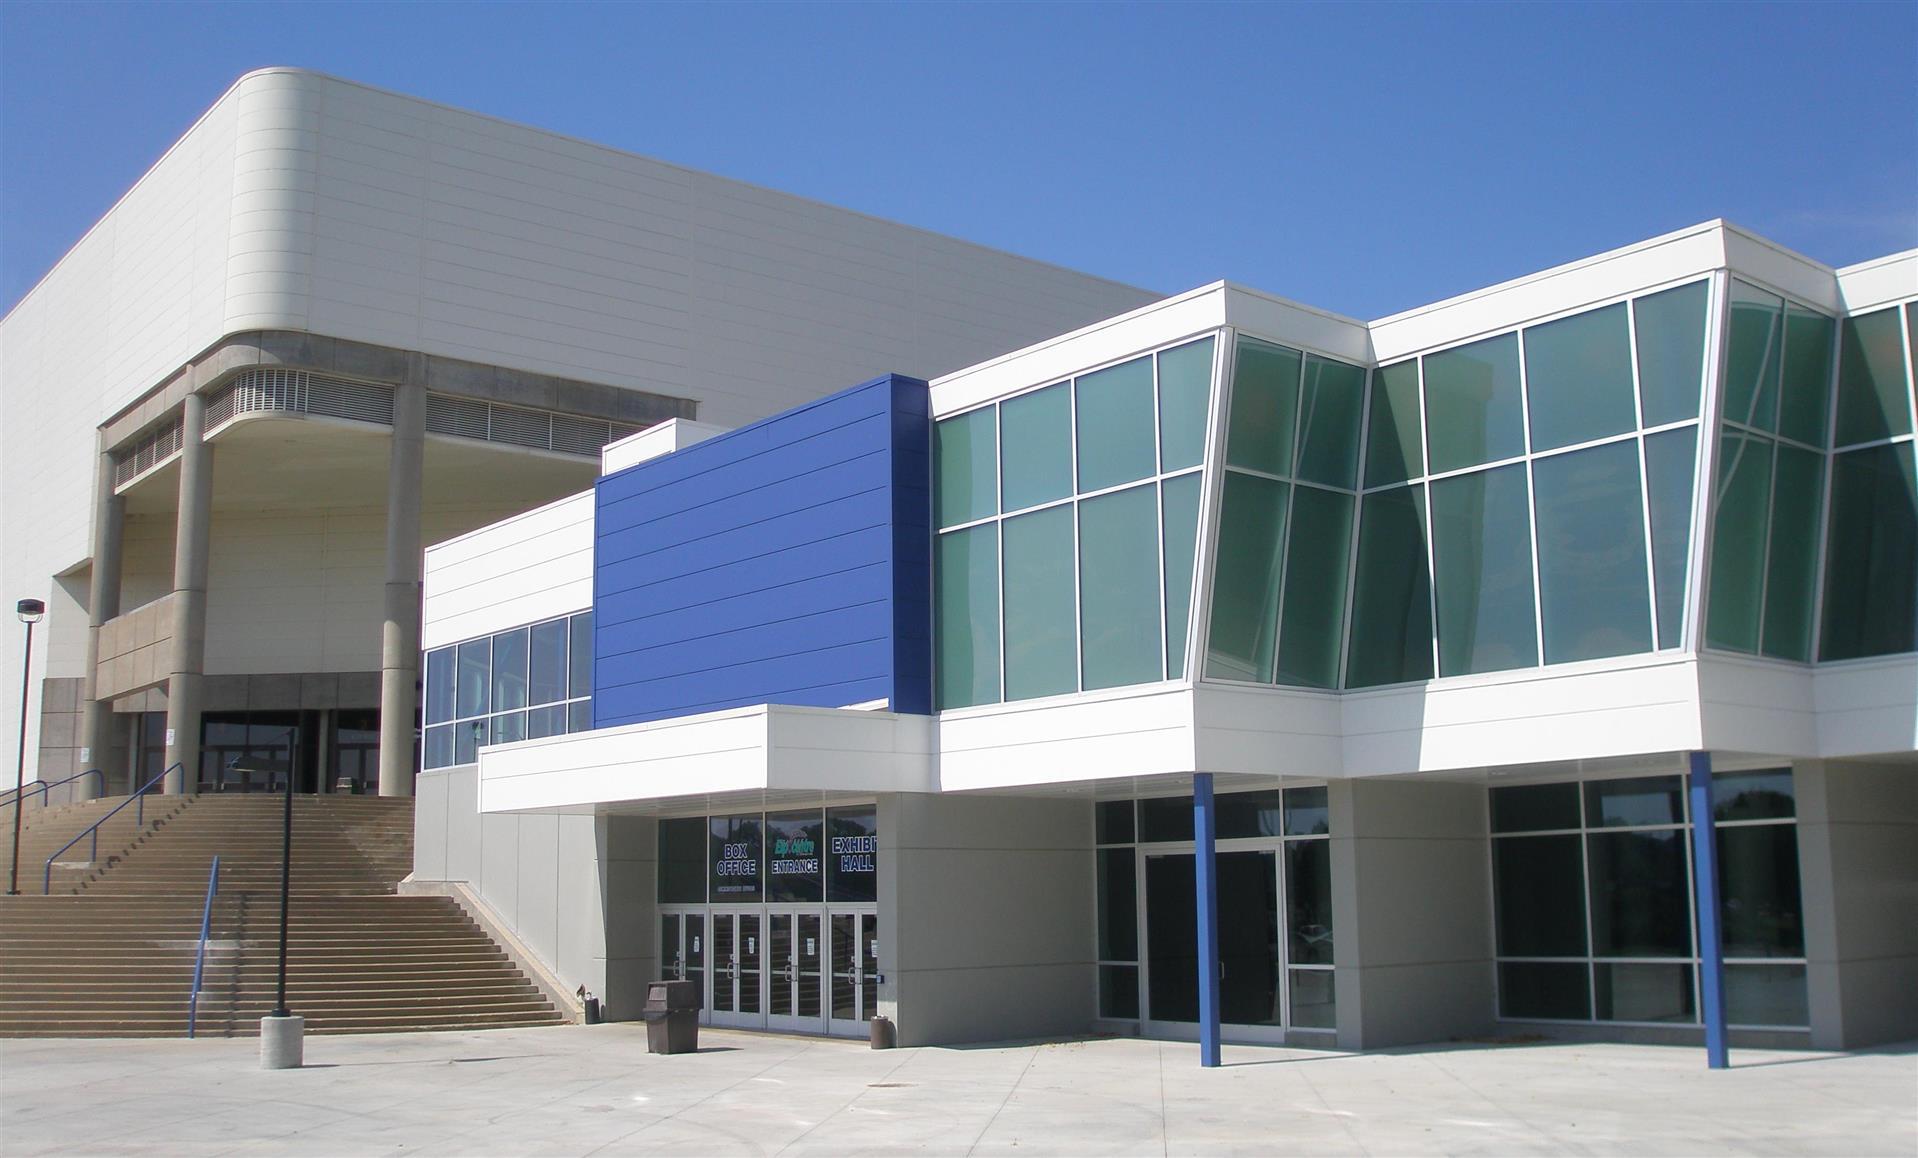 Stormont Vail Events Center (Formerly Kansas Expocentre) in Topeka, KS